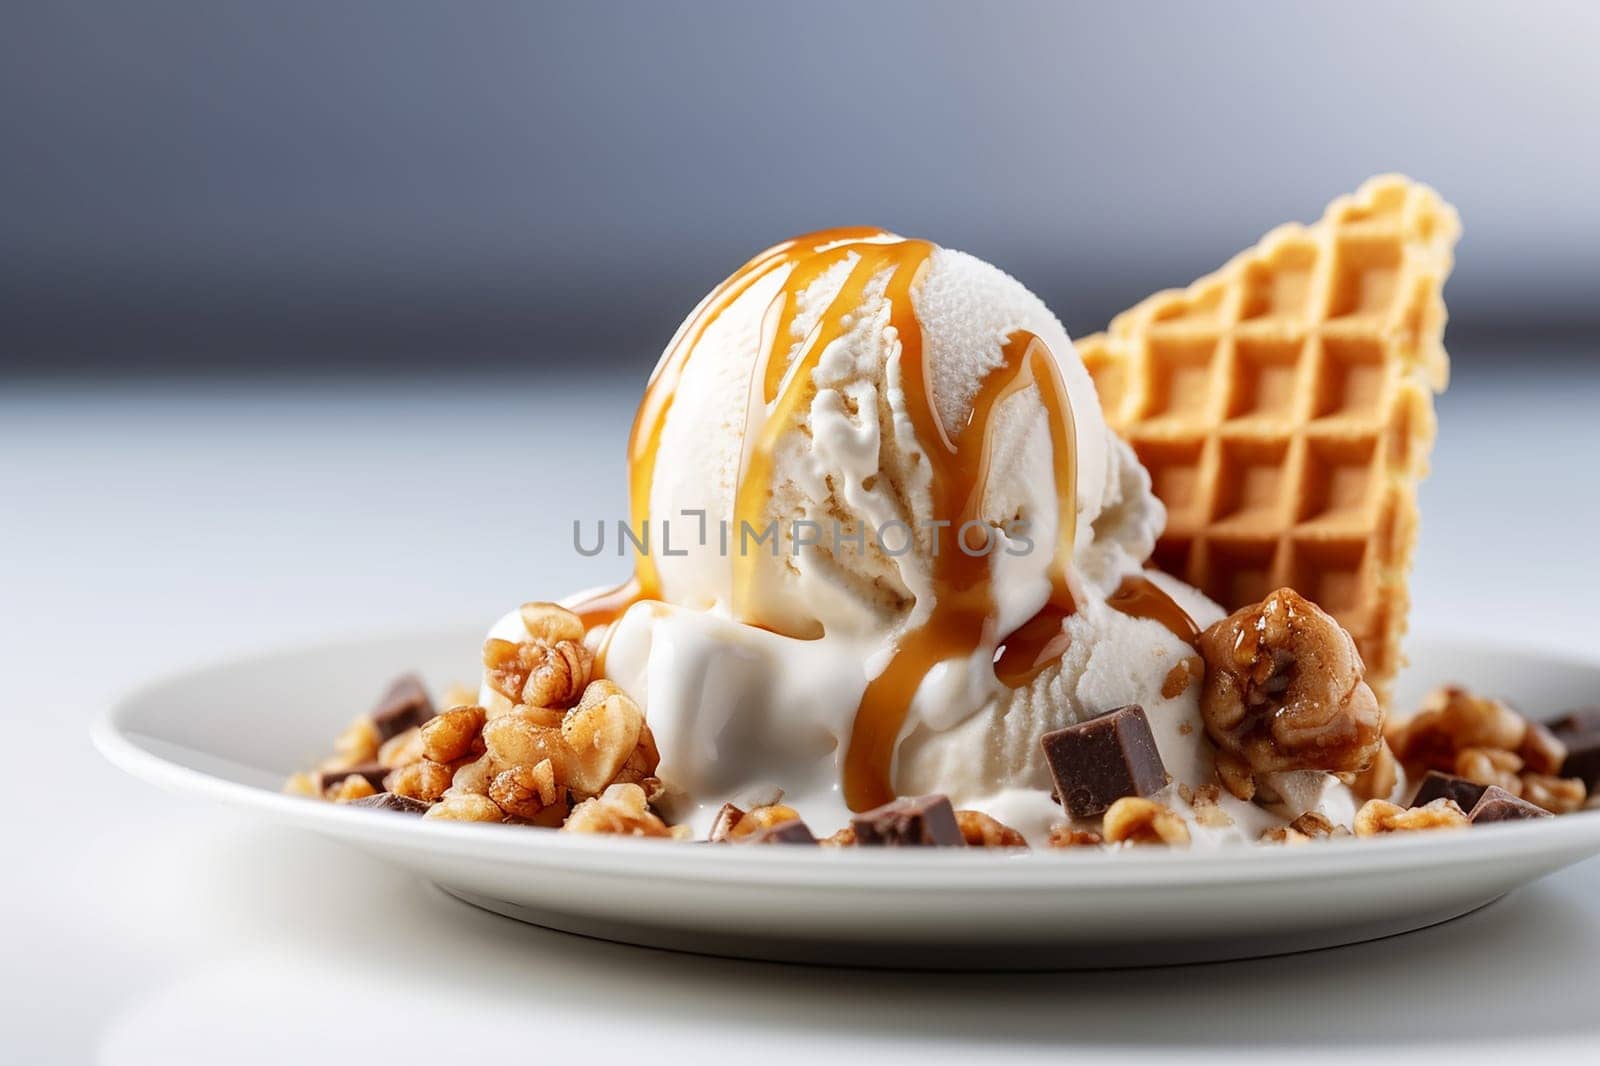 Vanilla ice cream drizzled with caramel, nuts, and chocolate; waffle addition.